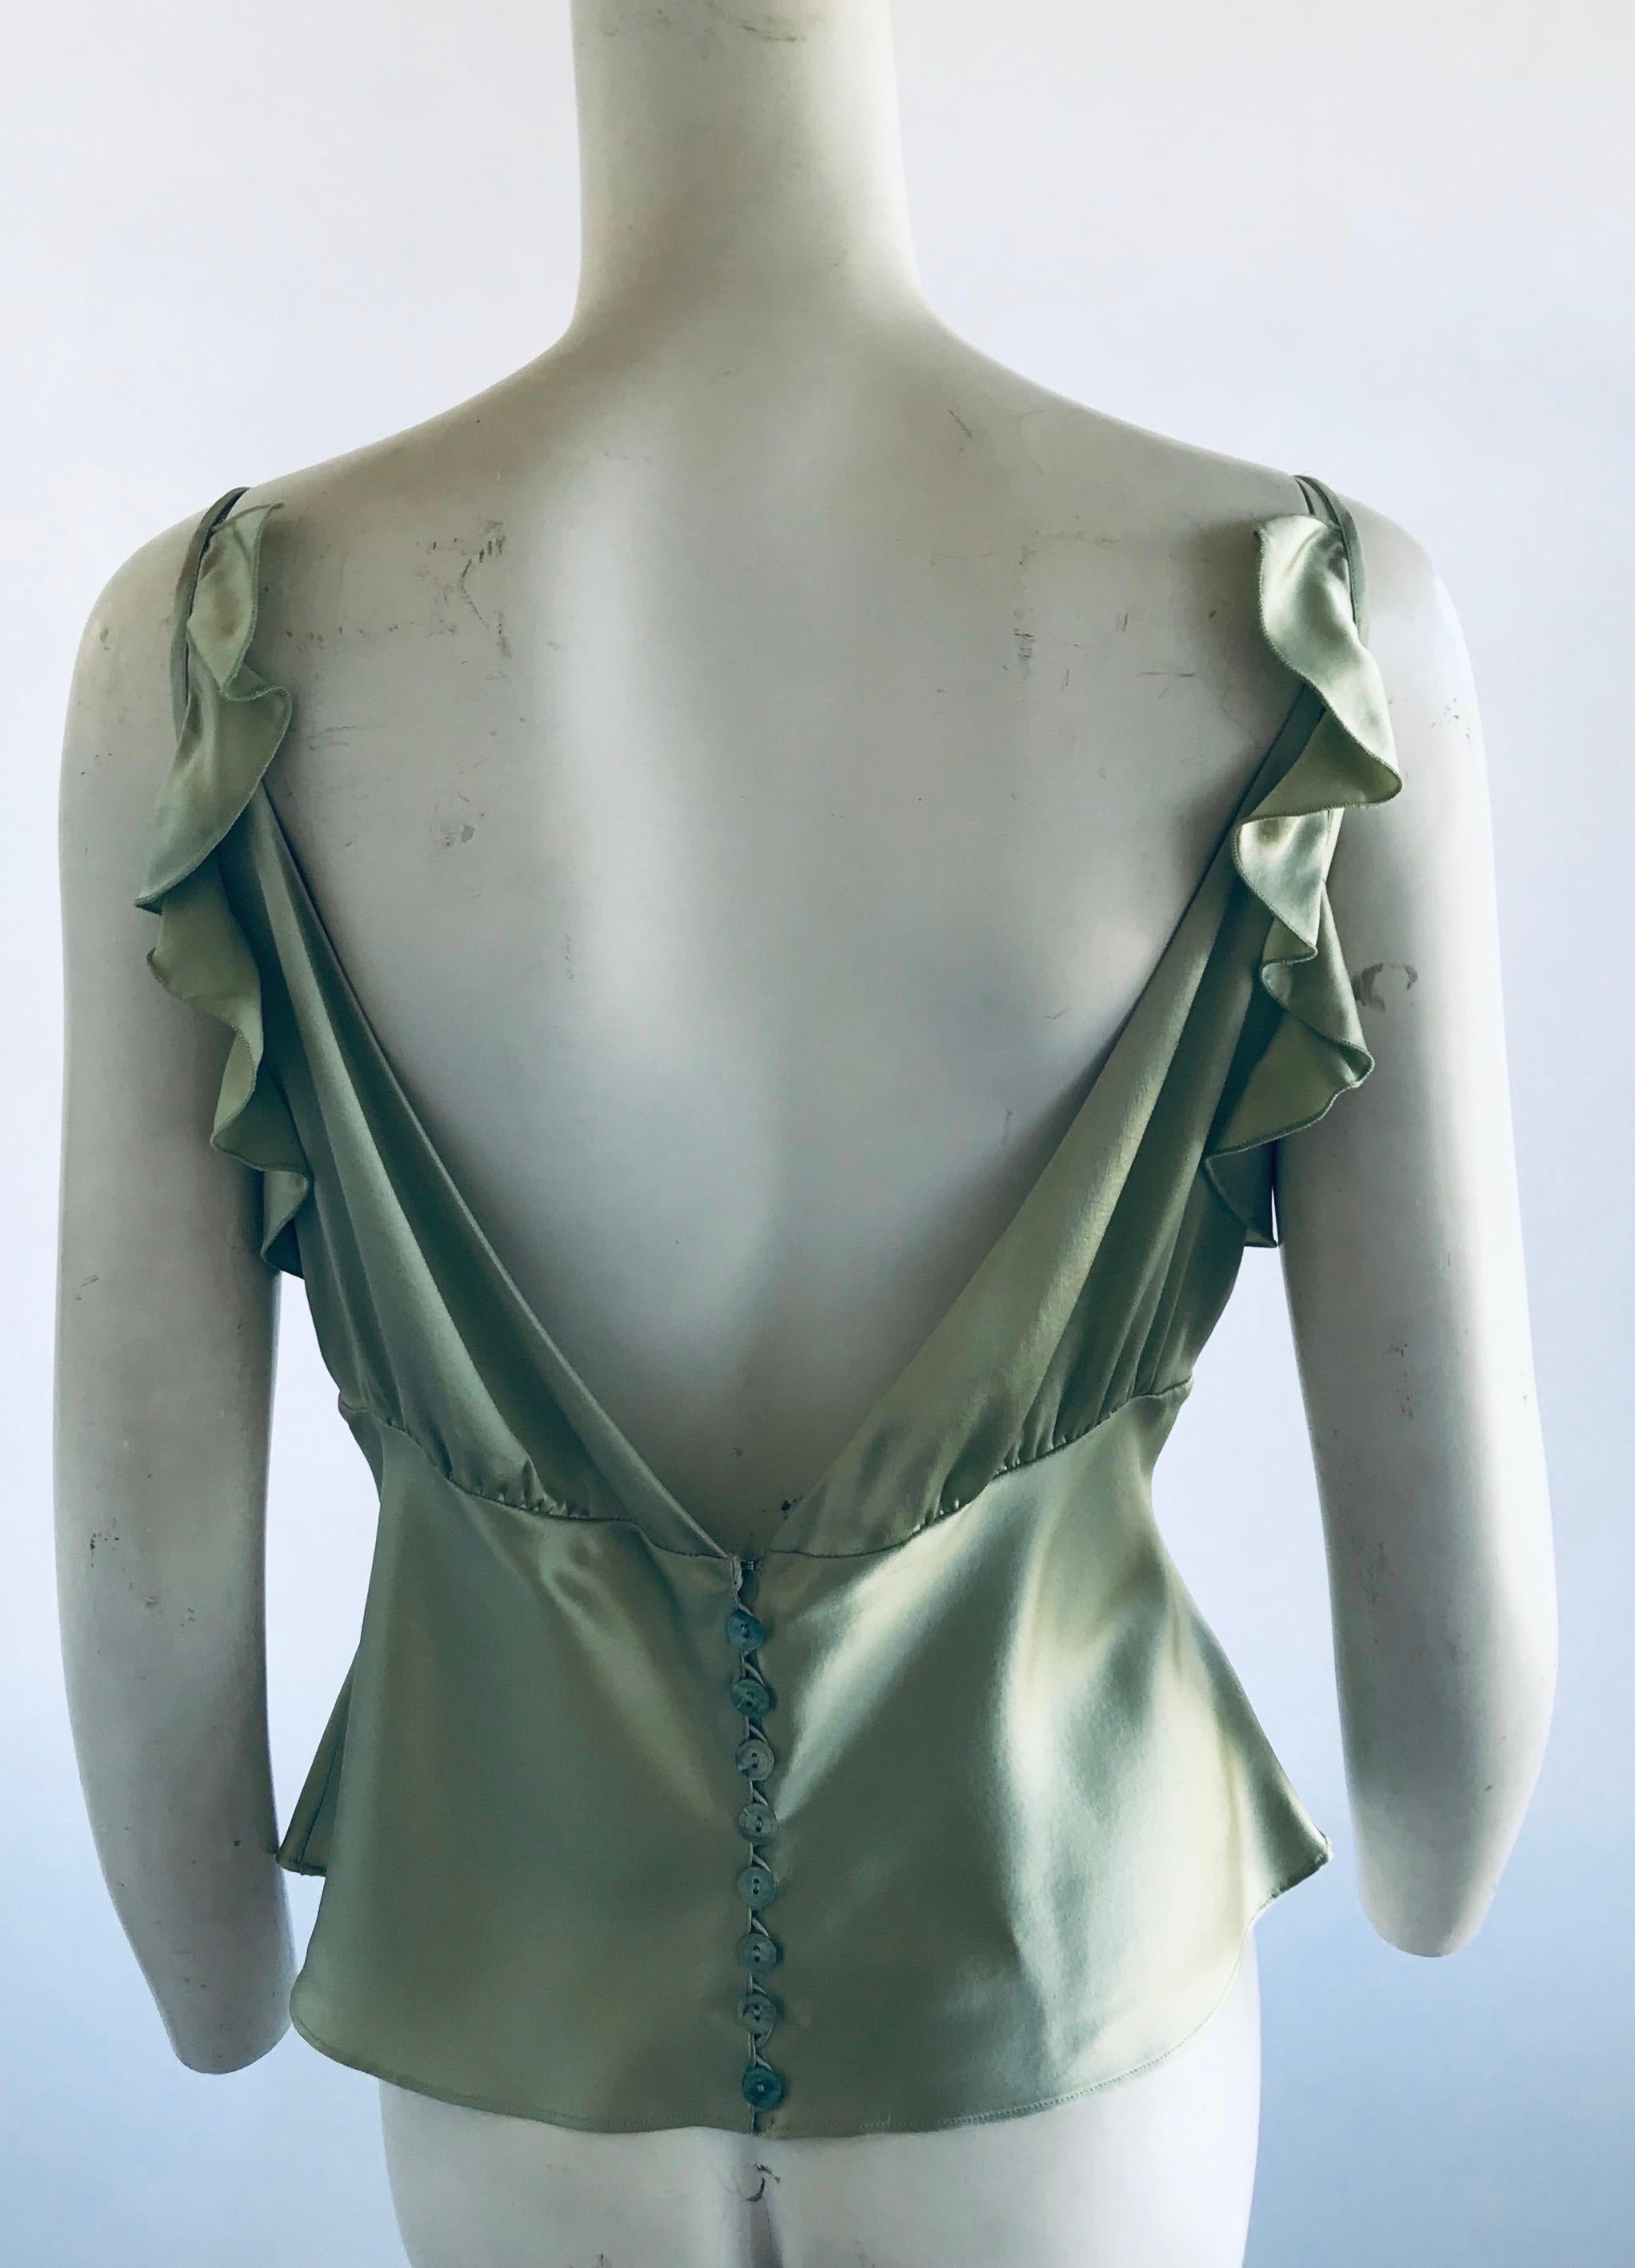 Stella Chloe 1999 Stella McCartney for Chloe Silk Runway Top In Excellent Condition For Sale In Chicago, IL